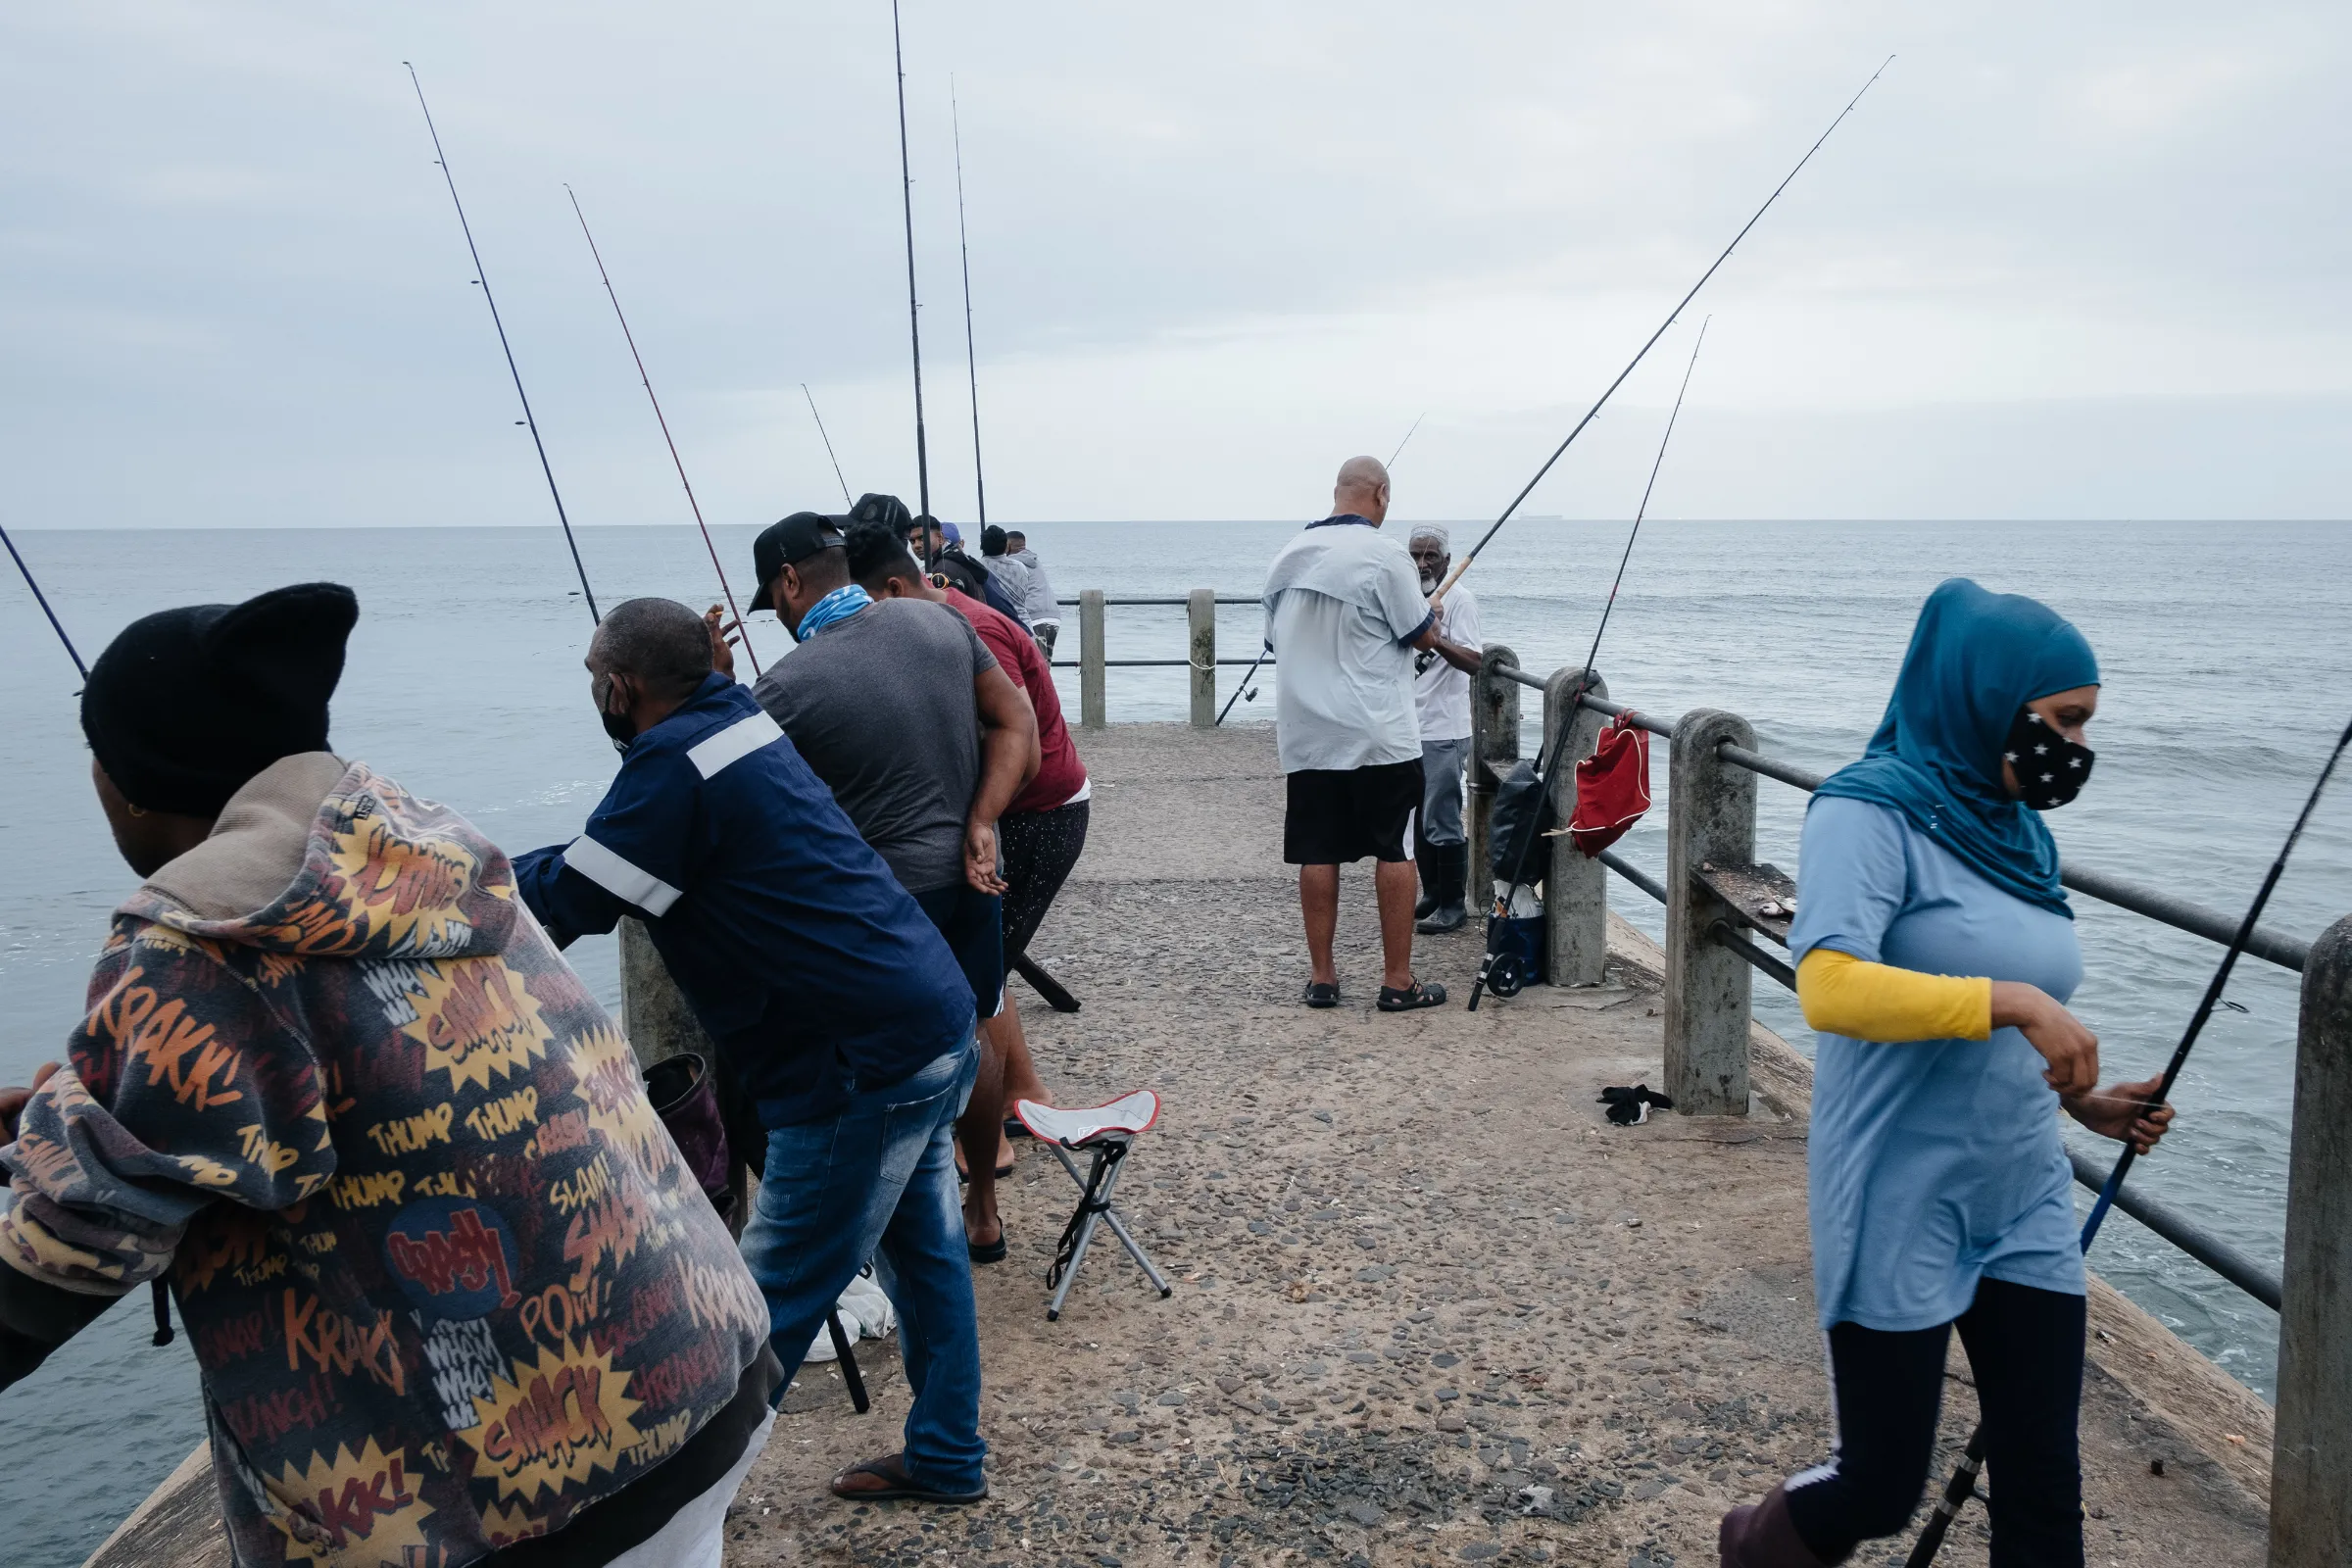 Subsistence anglers look for a catch at Snakepark Pier on the beachfront in Durban, South Africa, April 1, 2021. They fear warming oceans, sea level rise and decreases in the diversity of fish species will hit their catch. Thomson Reuters Foundation/James Puttick